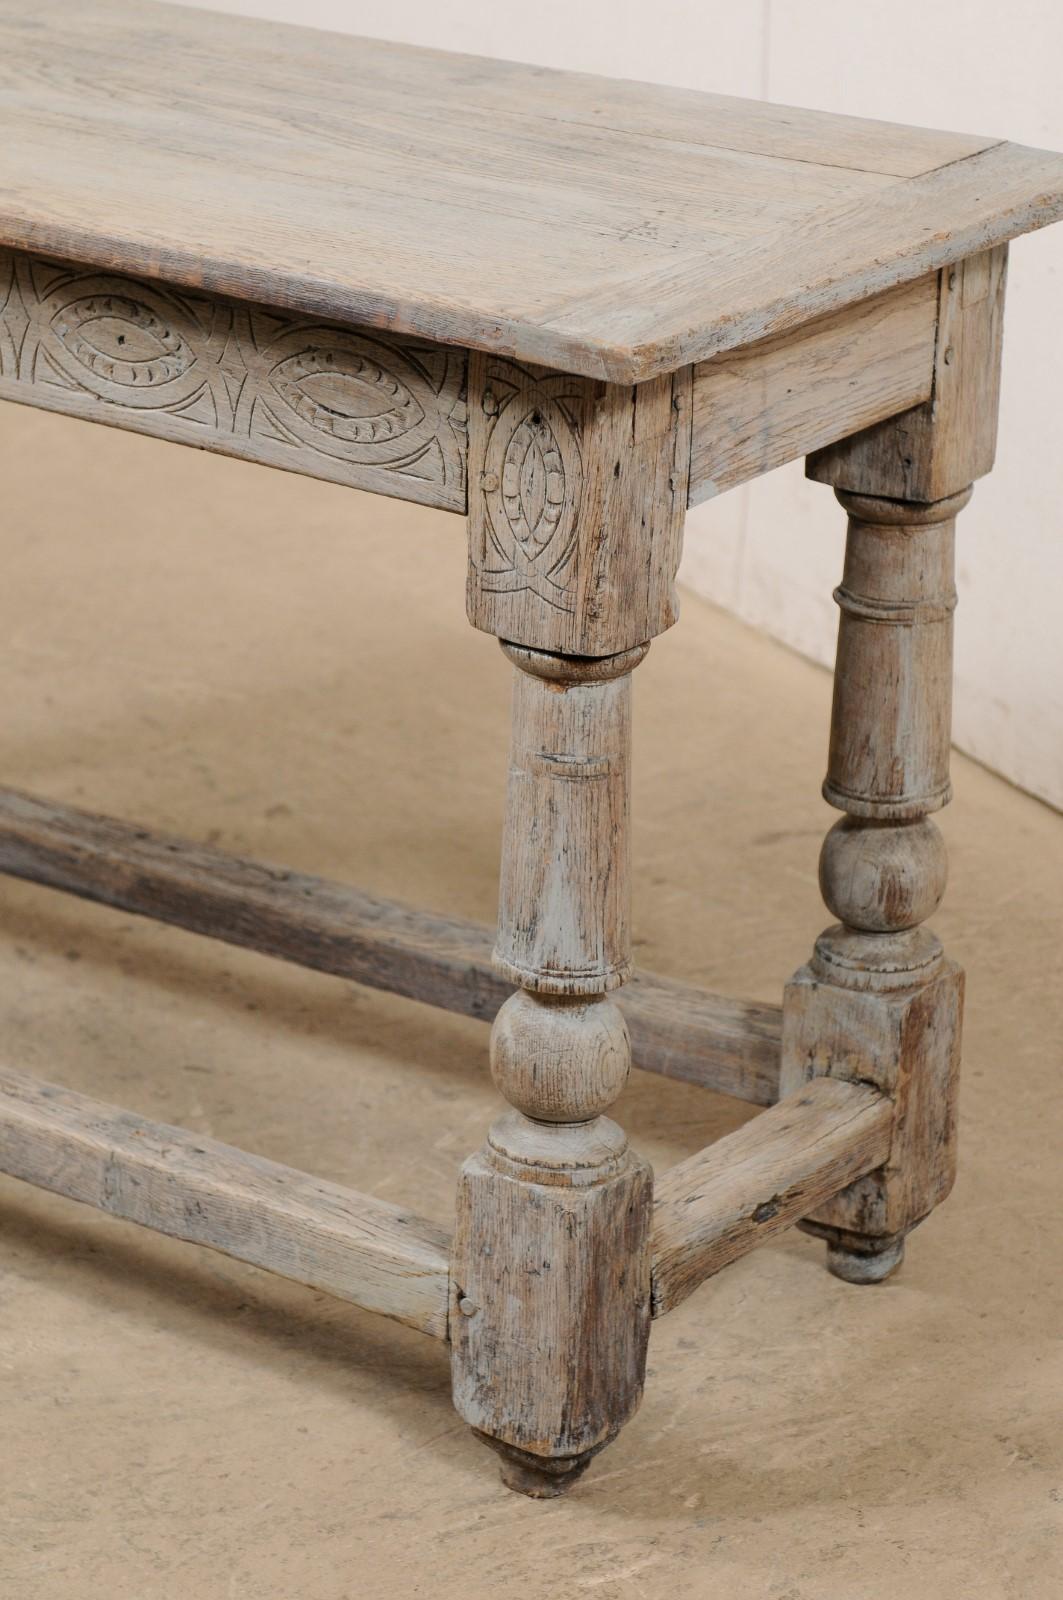 19th Century Antique English Wood Console Table w/ Elegantly Carved Skirt & Baluster Legs